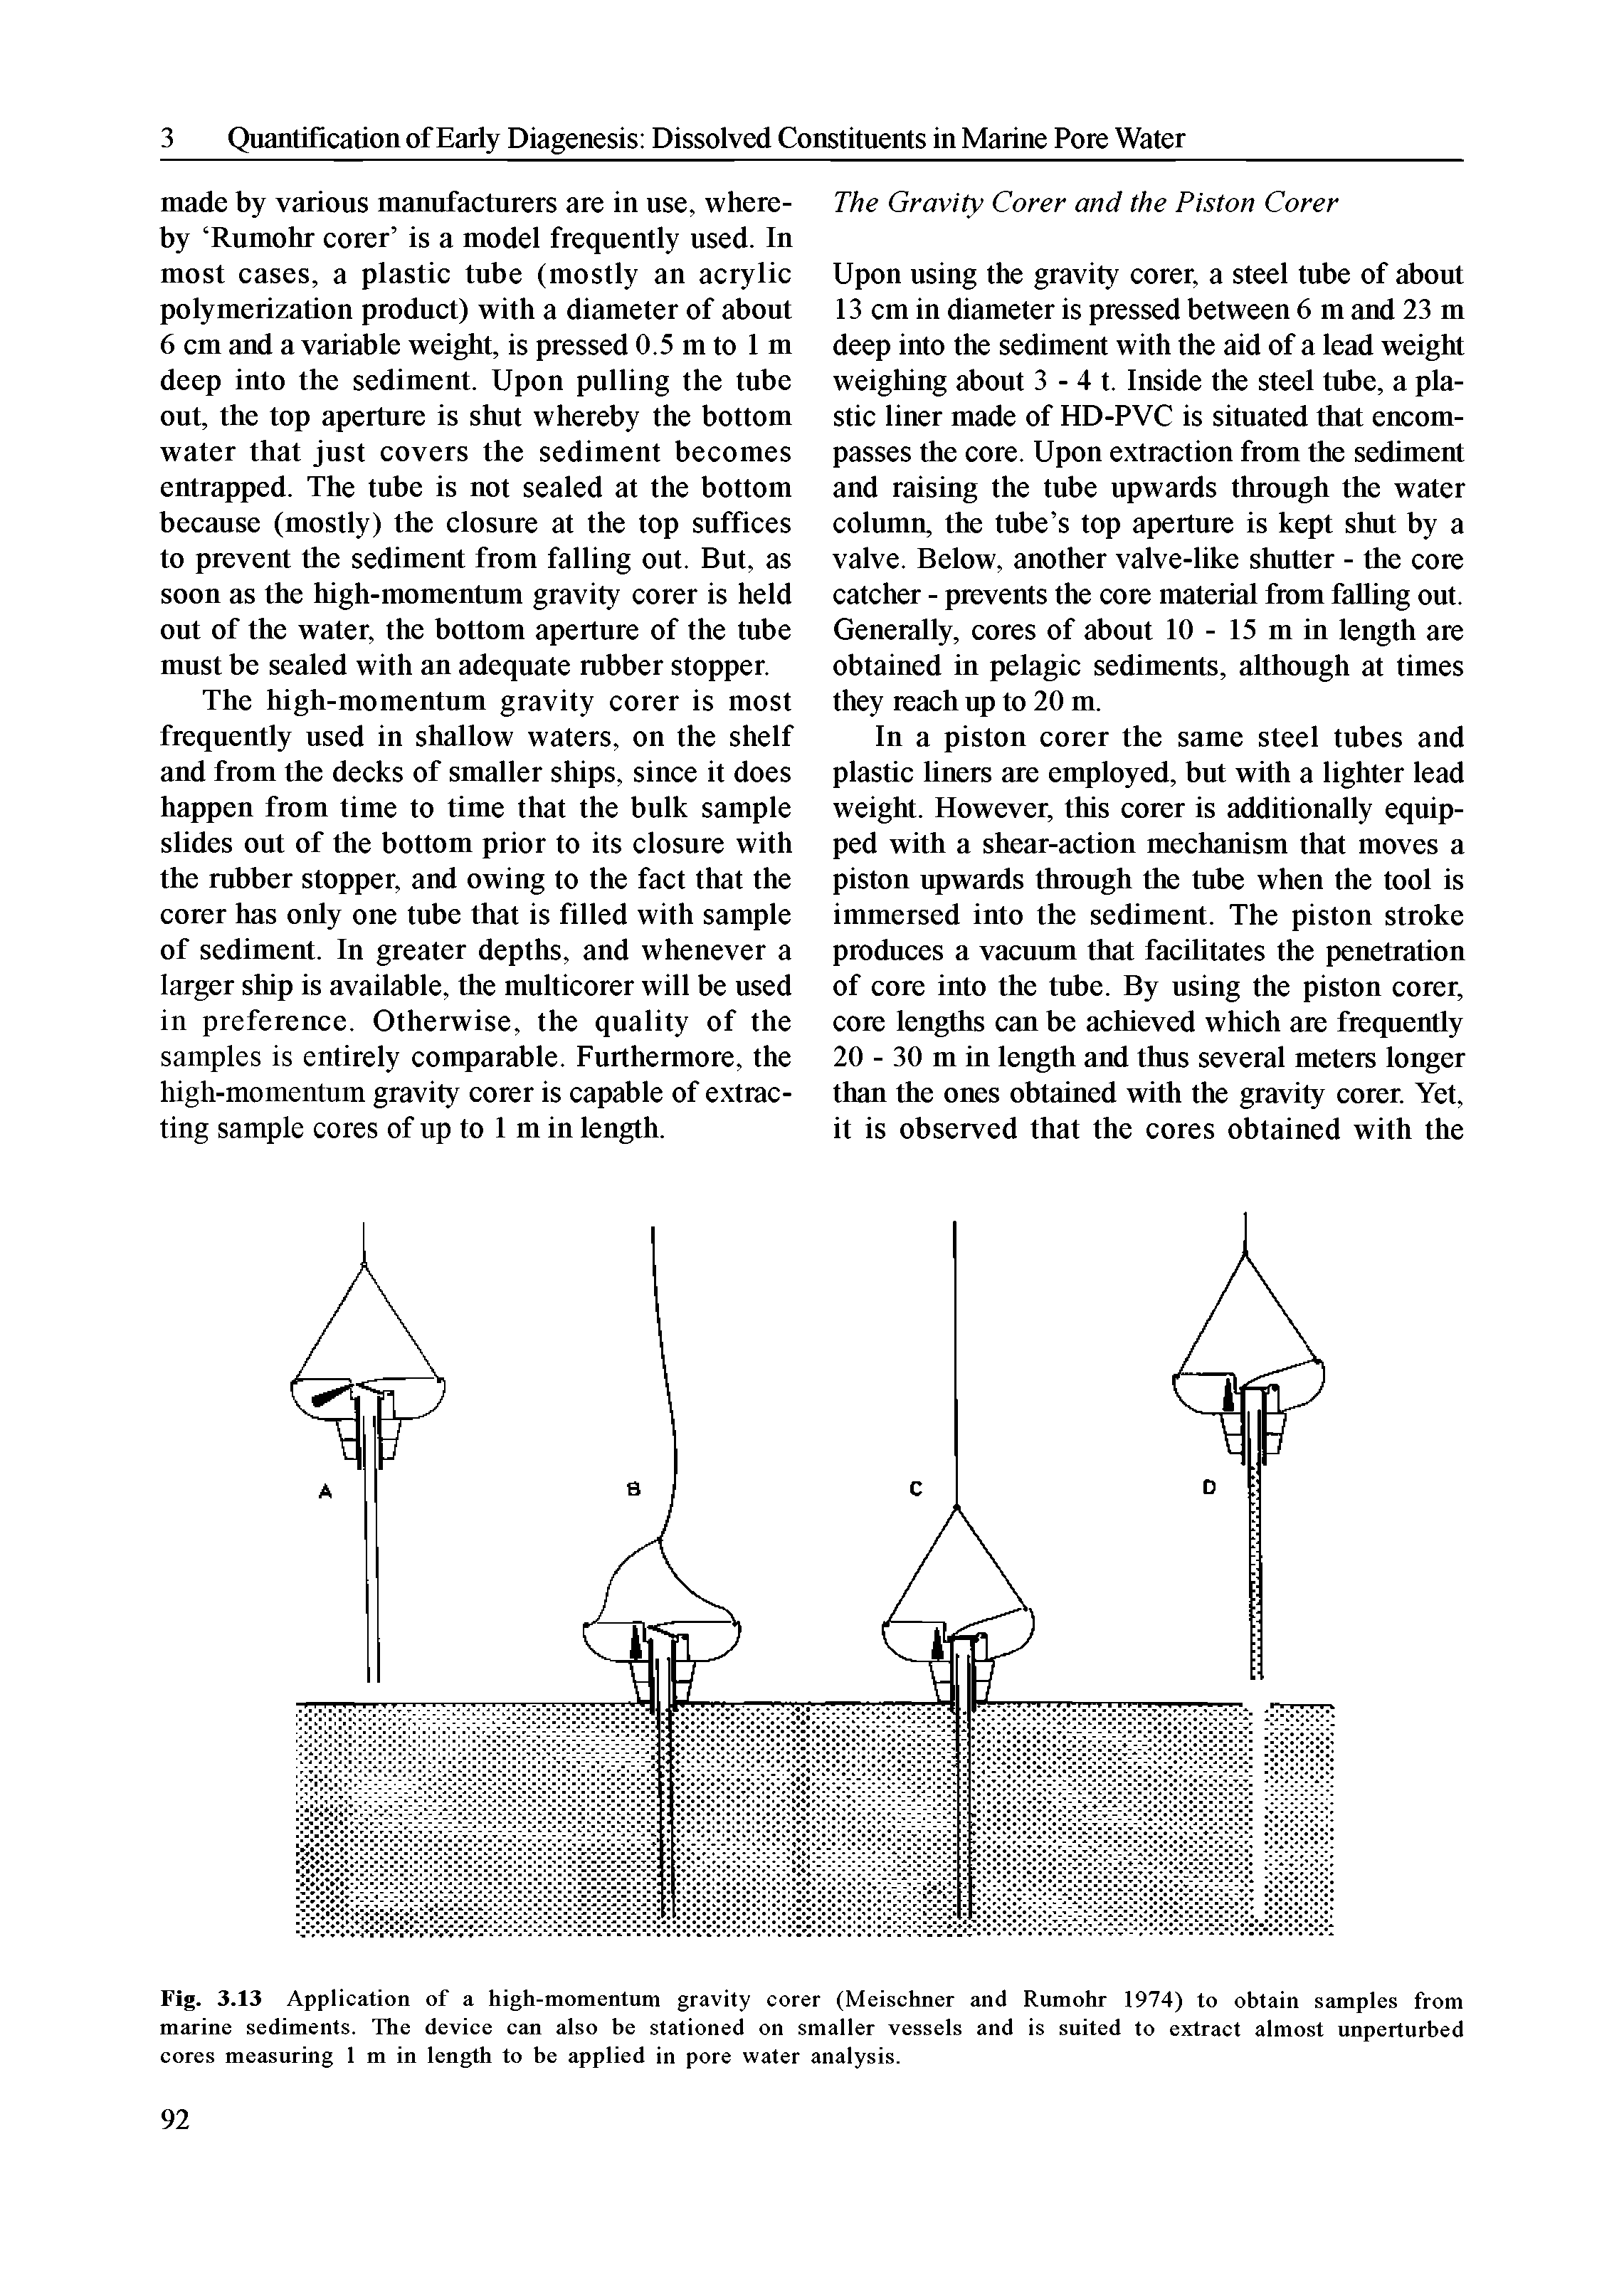 Fig. 3.13 Application of a high-momentum gravity corer (Meischner and Rumohr 1974) to obtain samples from marine sediments. The device can also be stationed on smaller vessels and is suited to extract almost unperturbed cores measuring 1 m in length to be applied in pore water analysis.